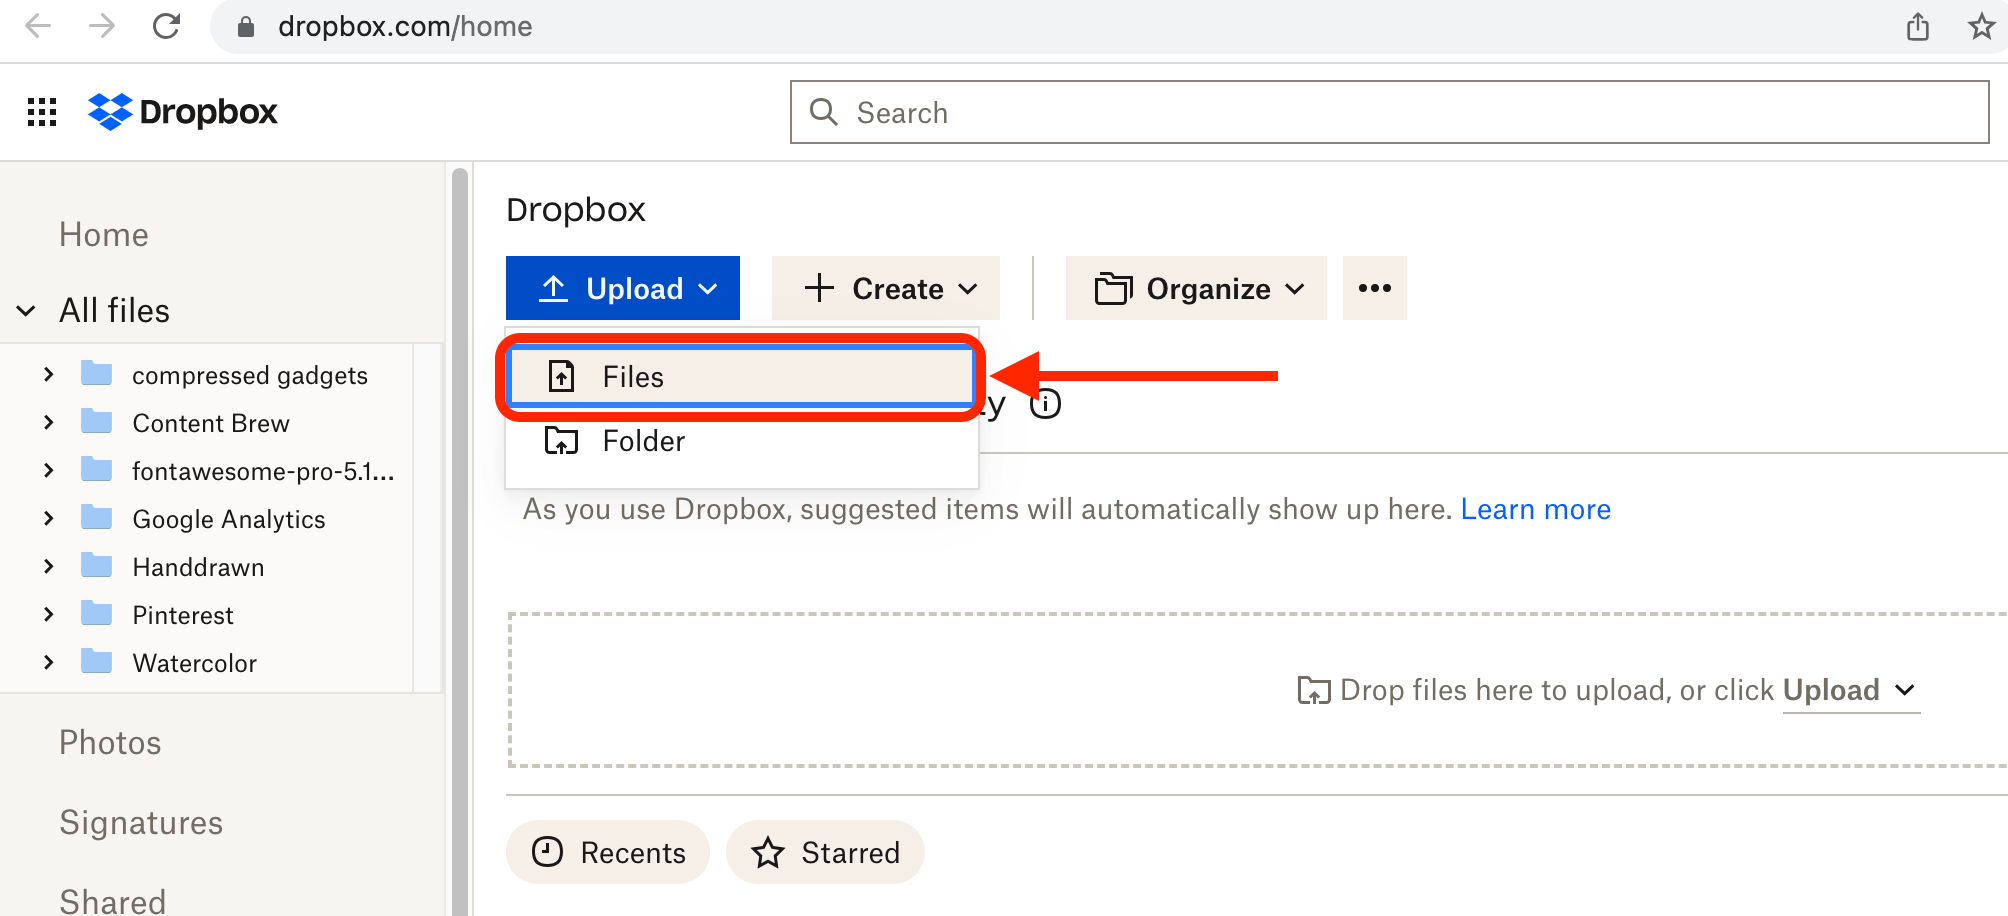 How To Upload Files Using Dropbox: Step 3